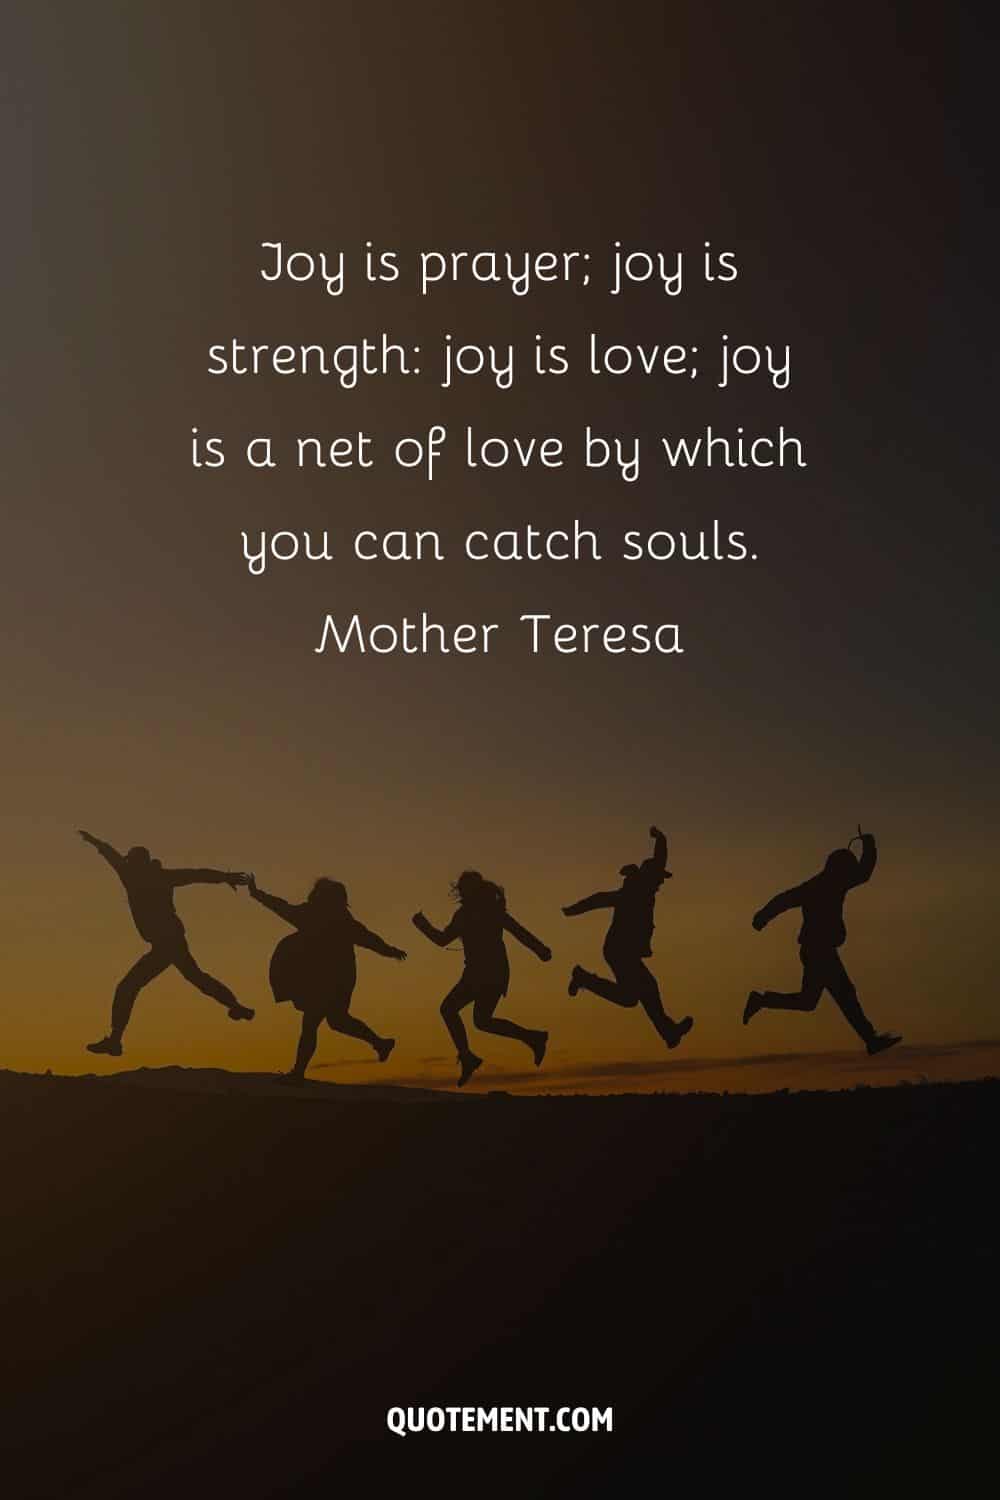 image of people dancing representing extraordinary quote on joy